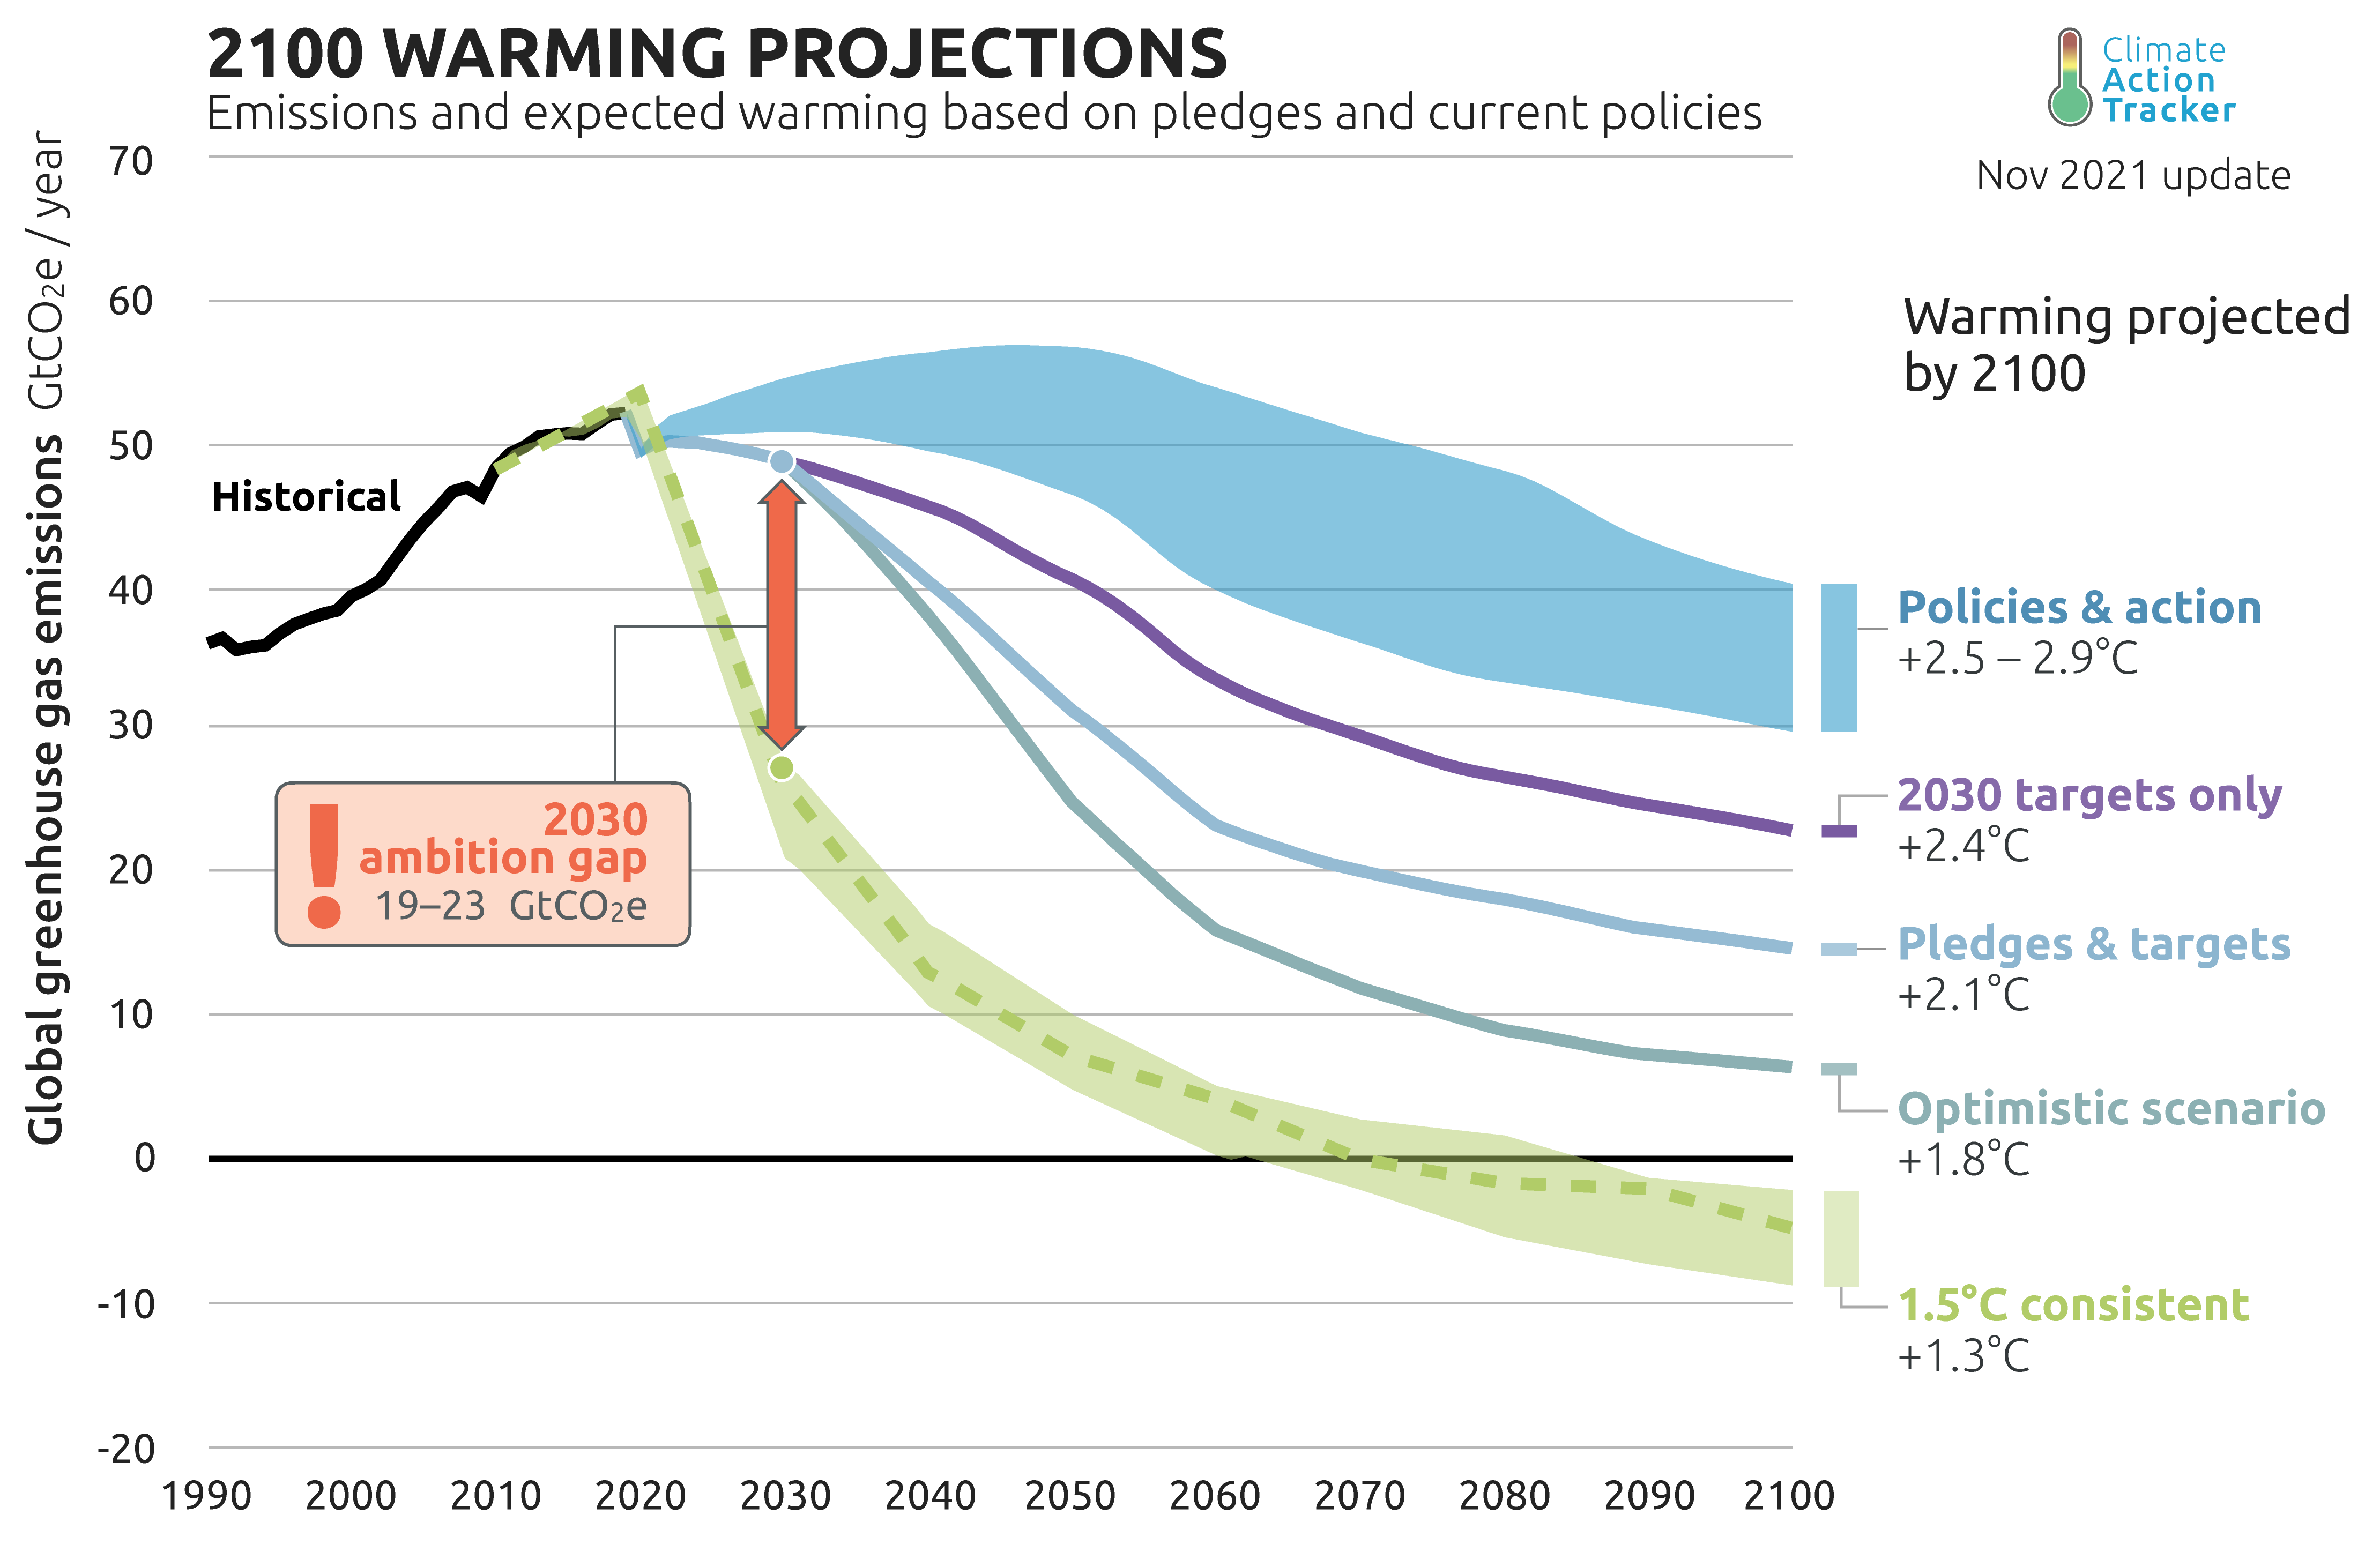 blogpost_2100_warming_projections.png (278 KB)